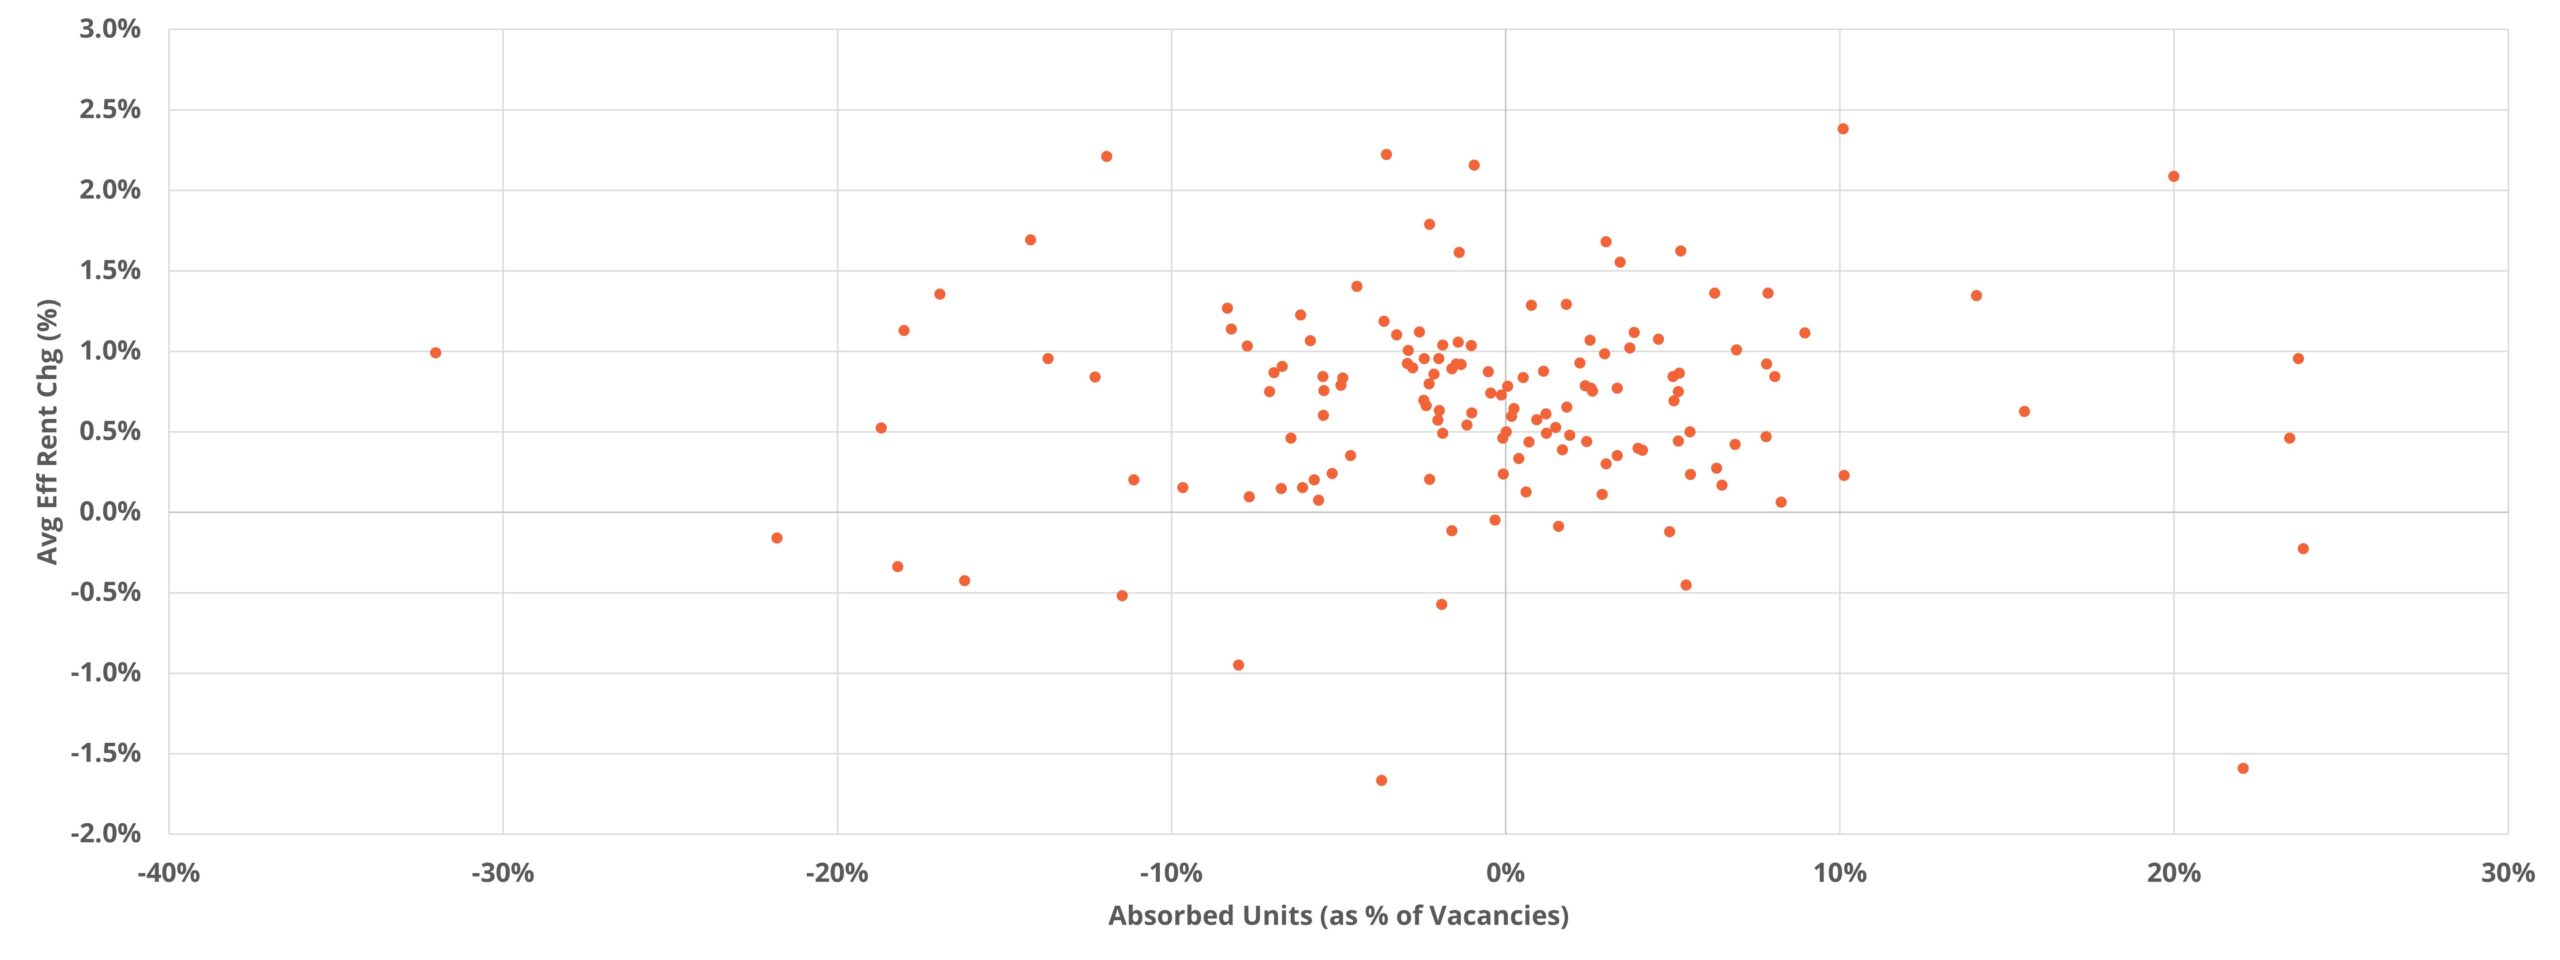 Absorbed Units as Percent of Vacancies